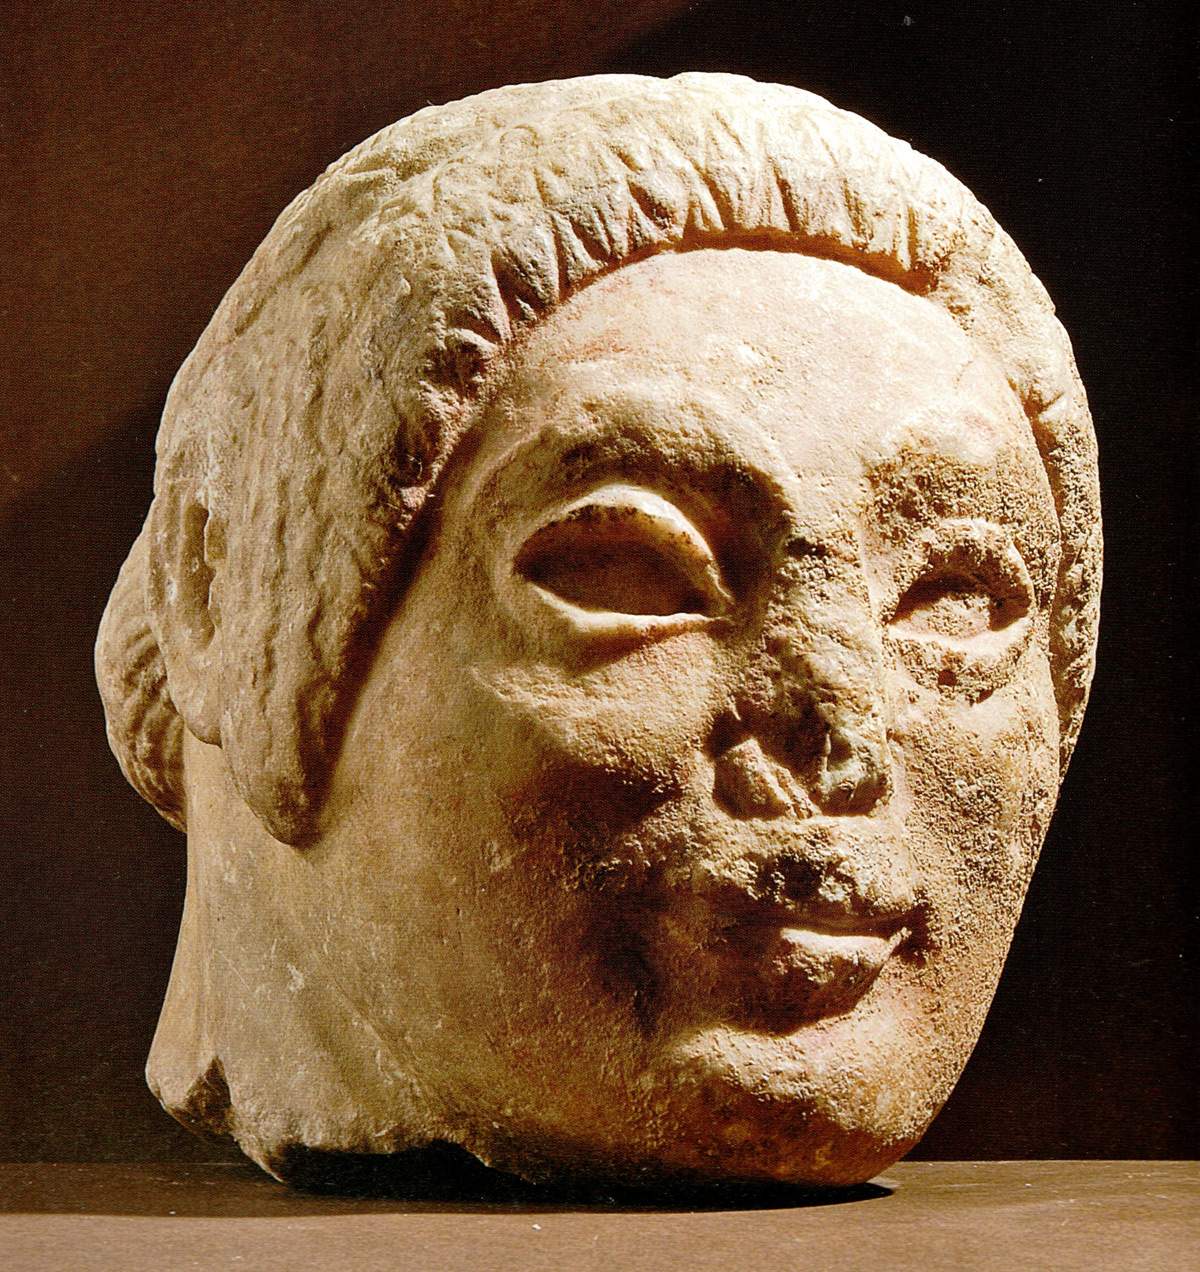 State buys one of the most important Etruscan sculptures: the Lorenzini Head, hitherto privately owned, will go to a public museum